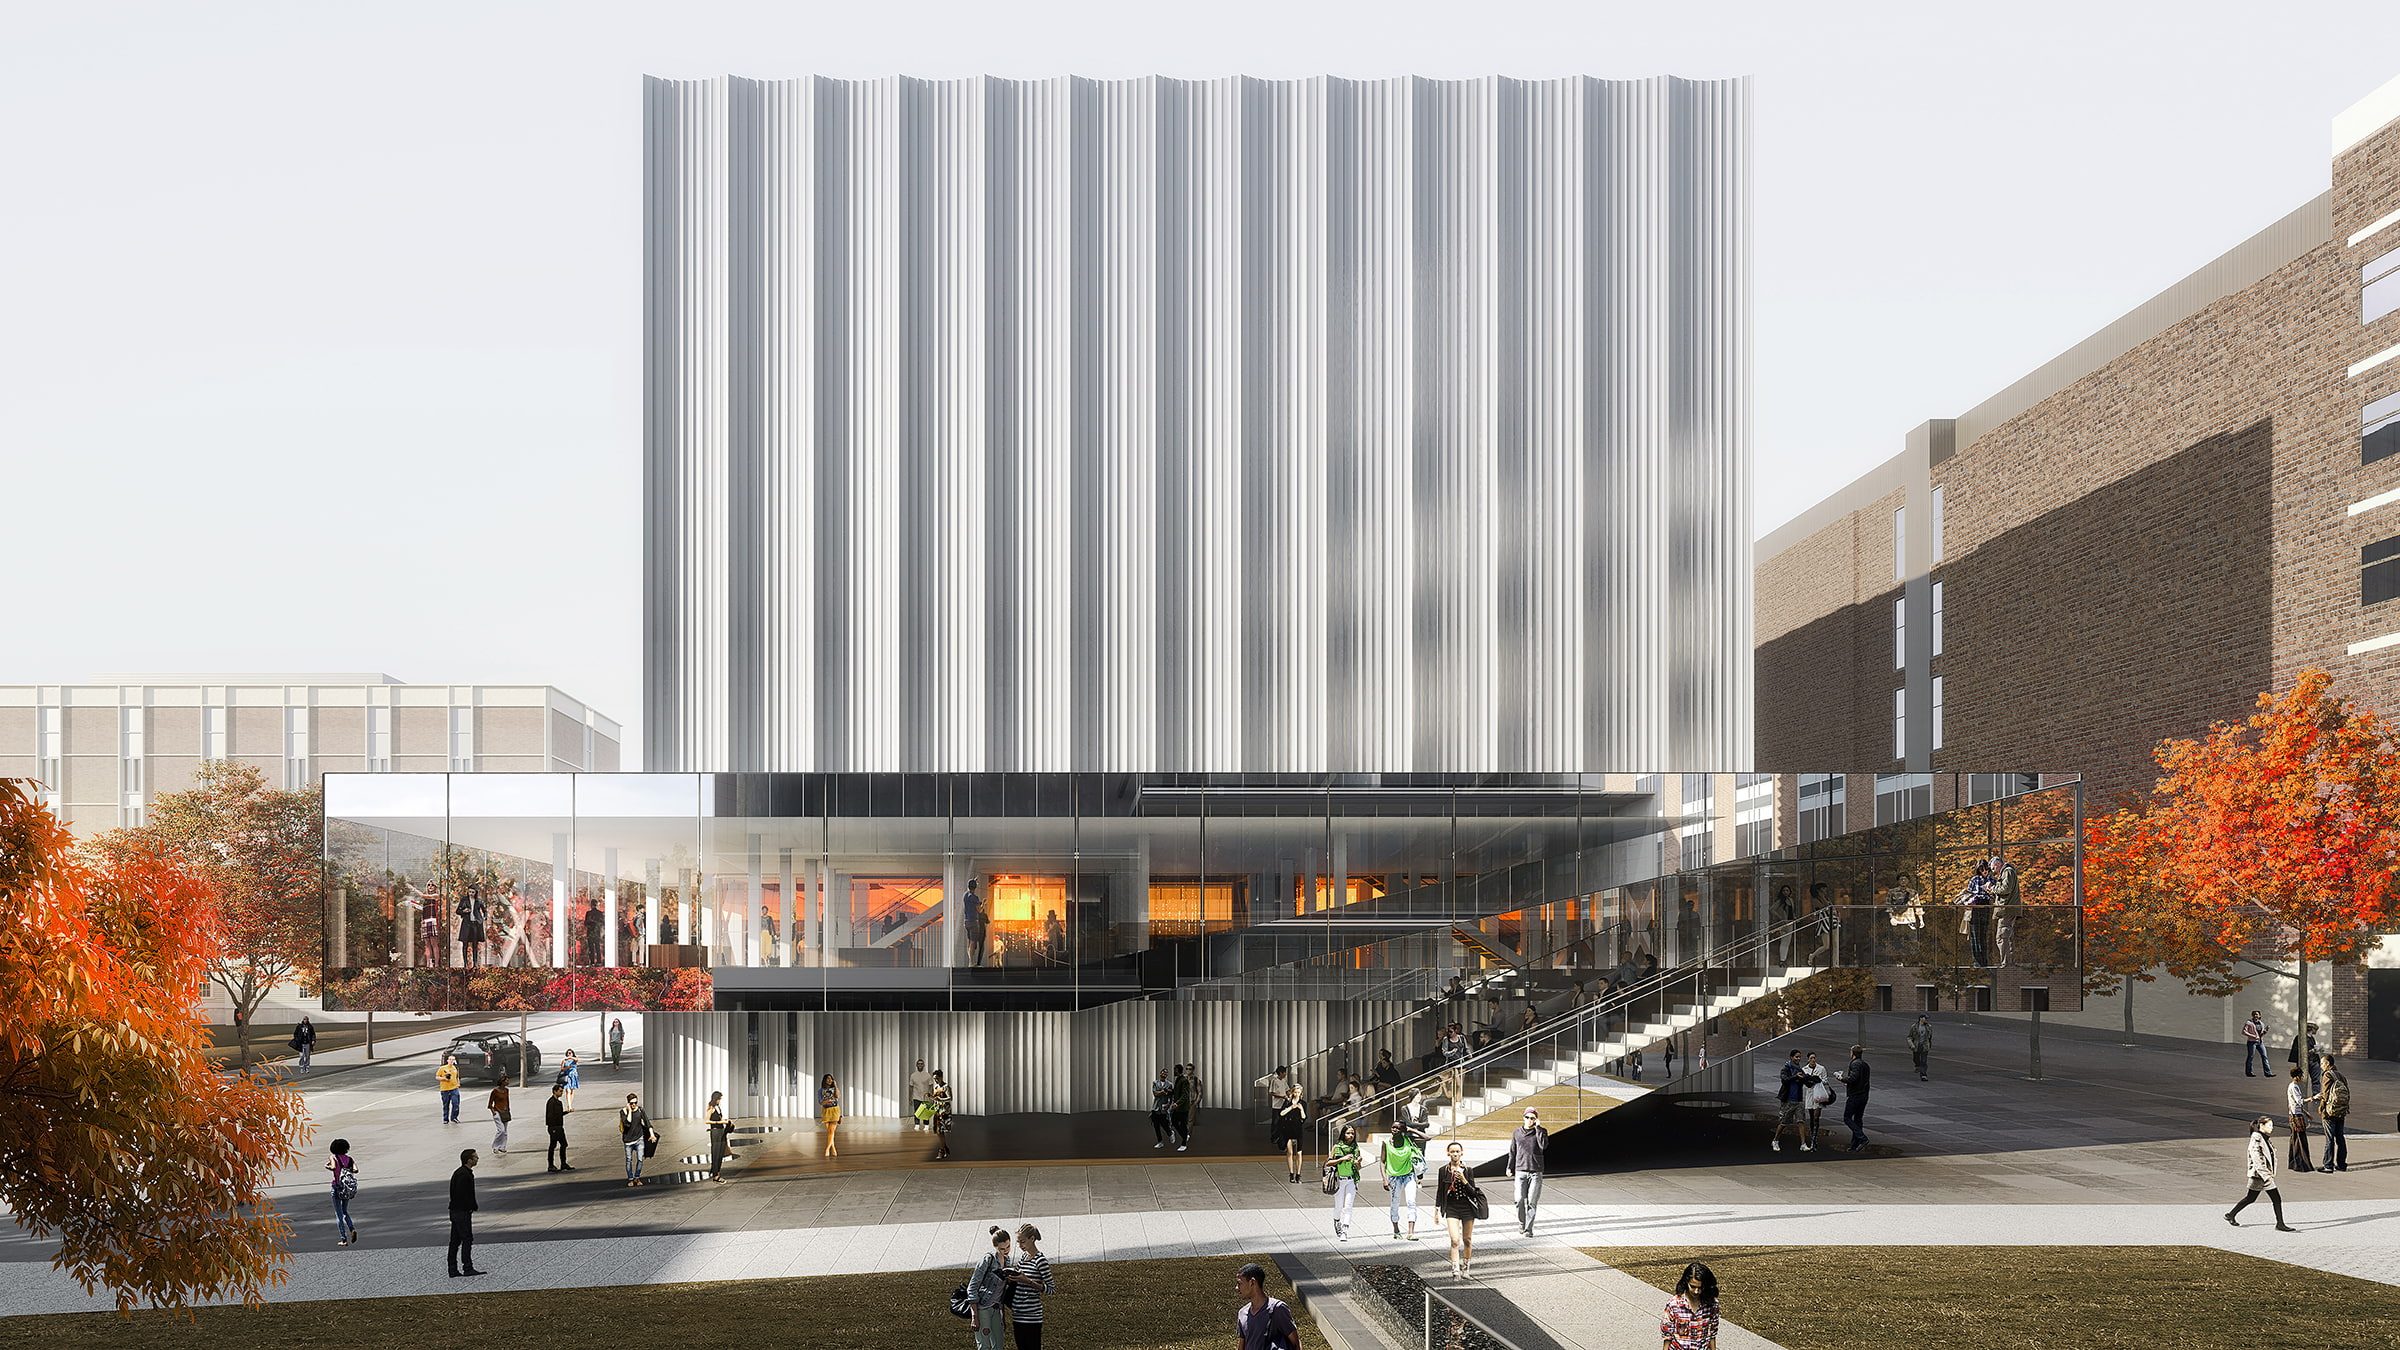 Visualization of the Brown University Performing Arts Center, designed by REX.